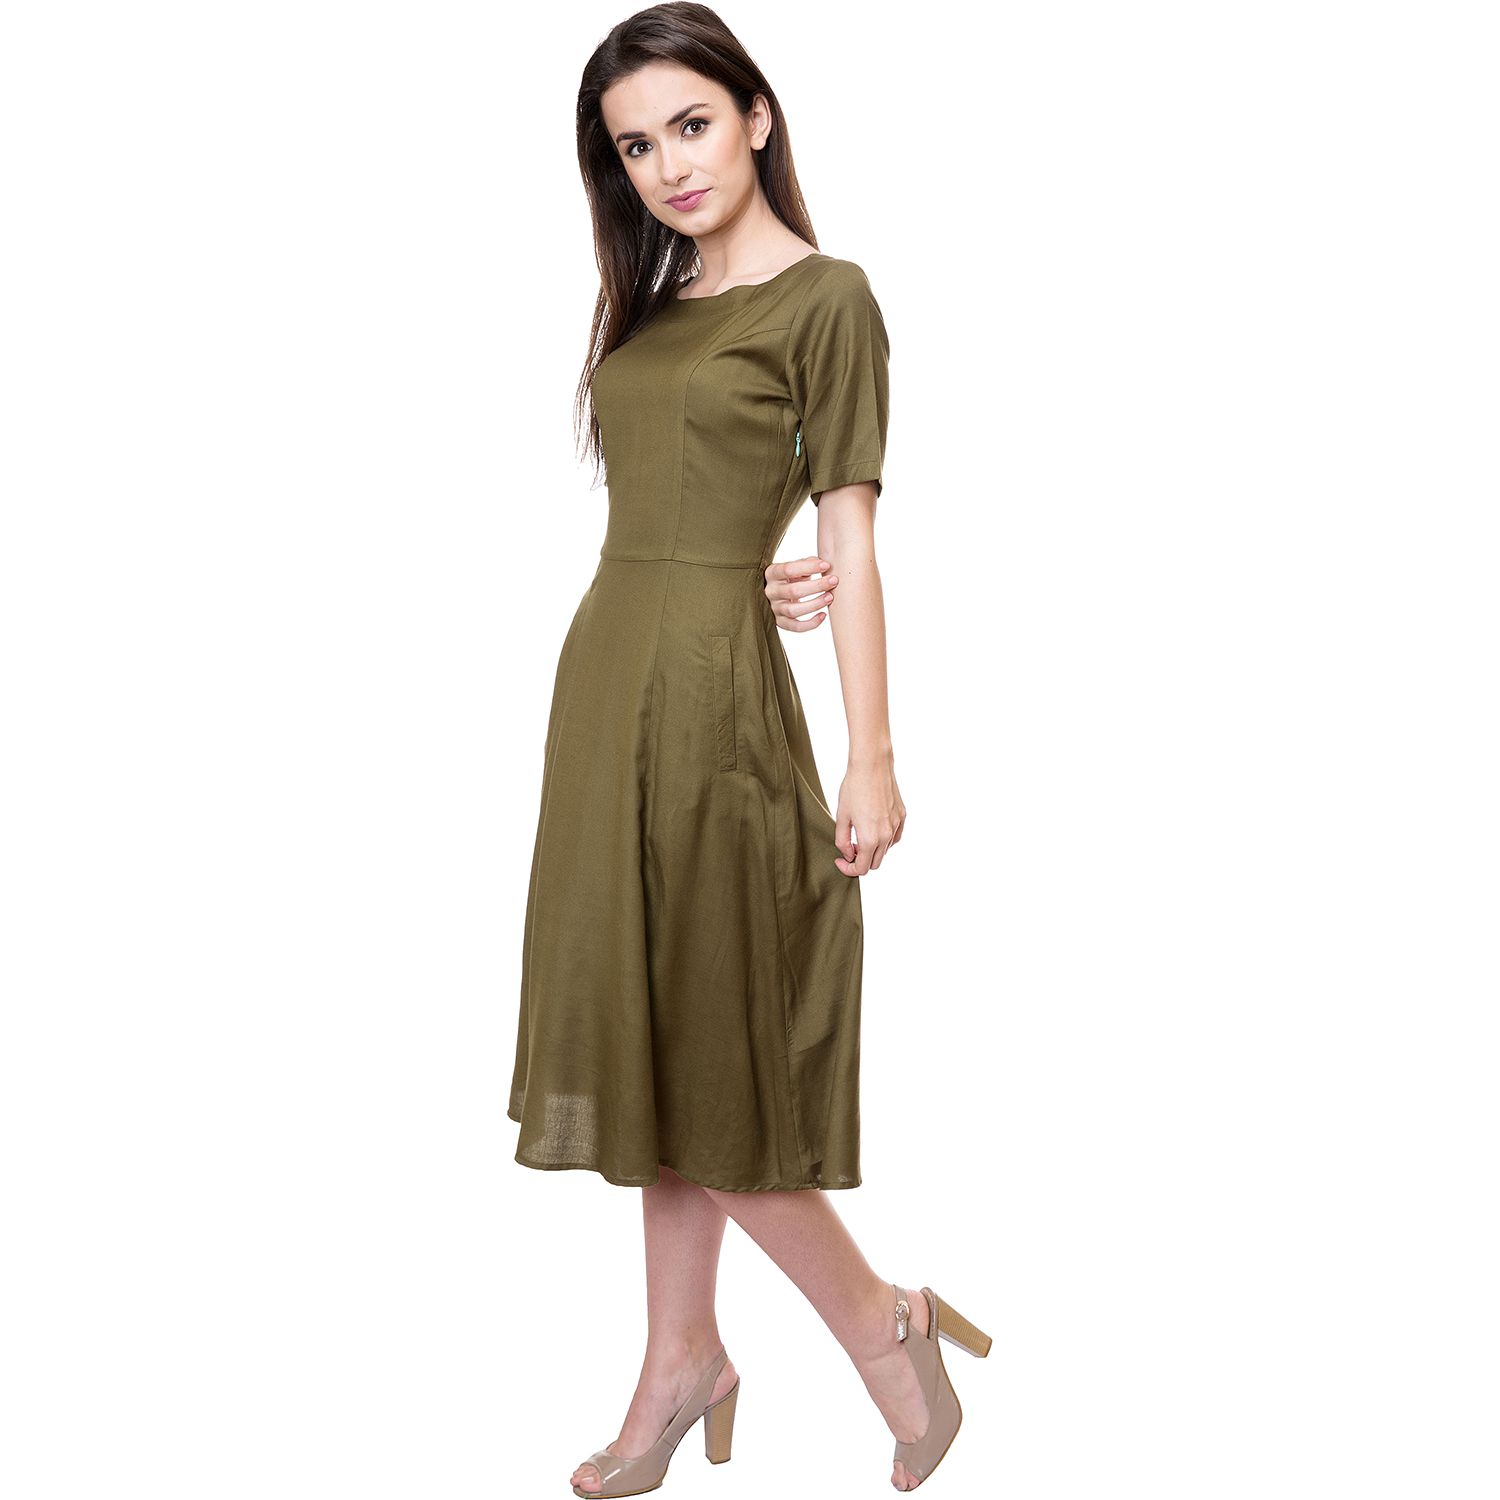 USD Rayon Green Dresses - Buy USD Rayon Green Dresses Online at Best ...